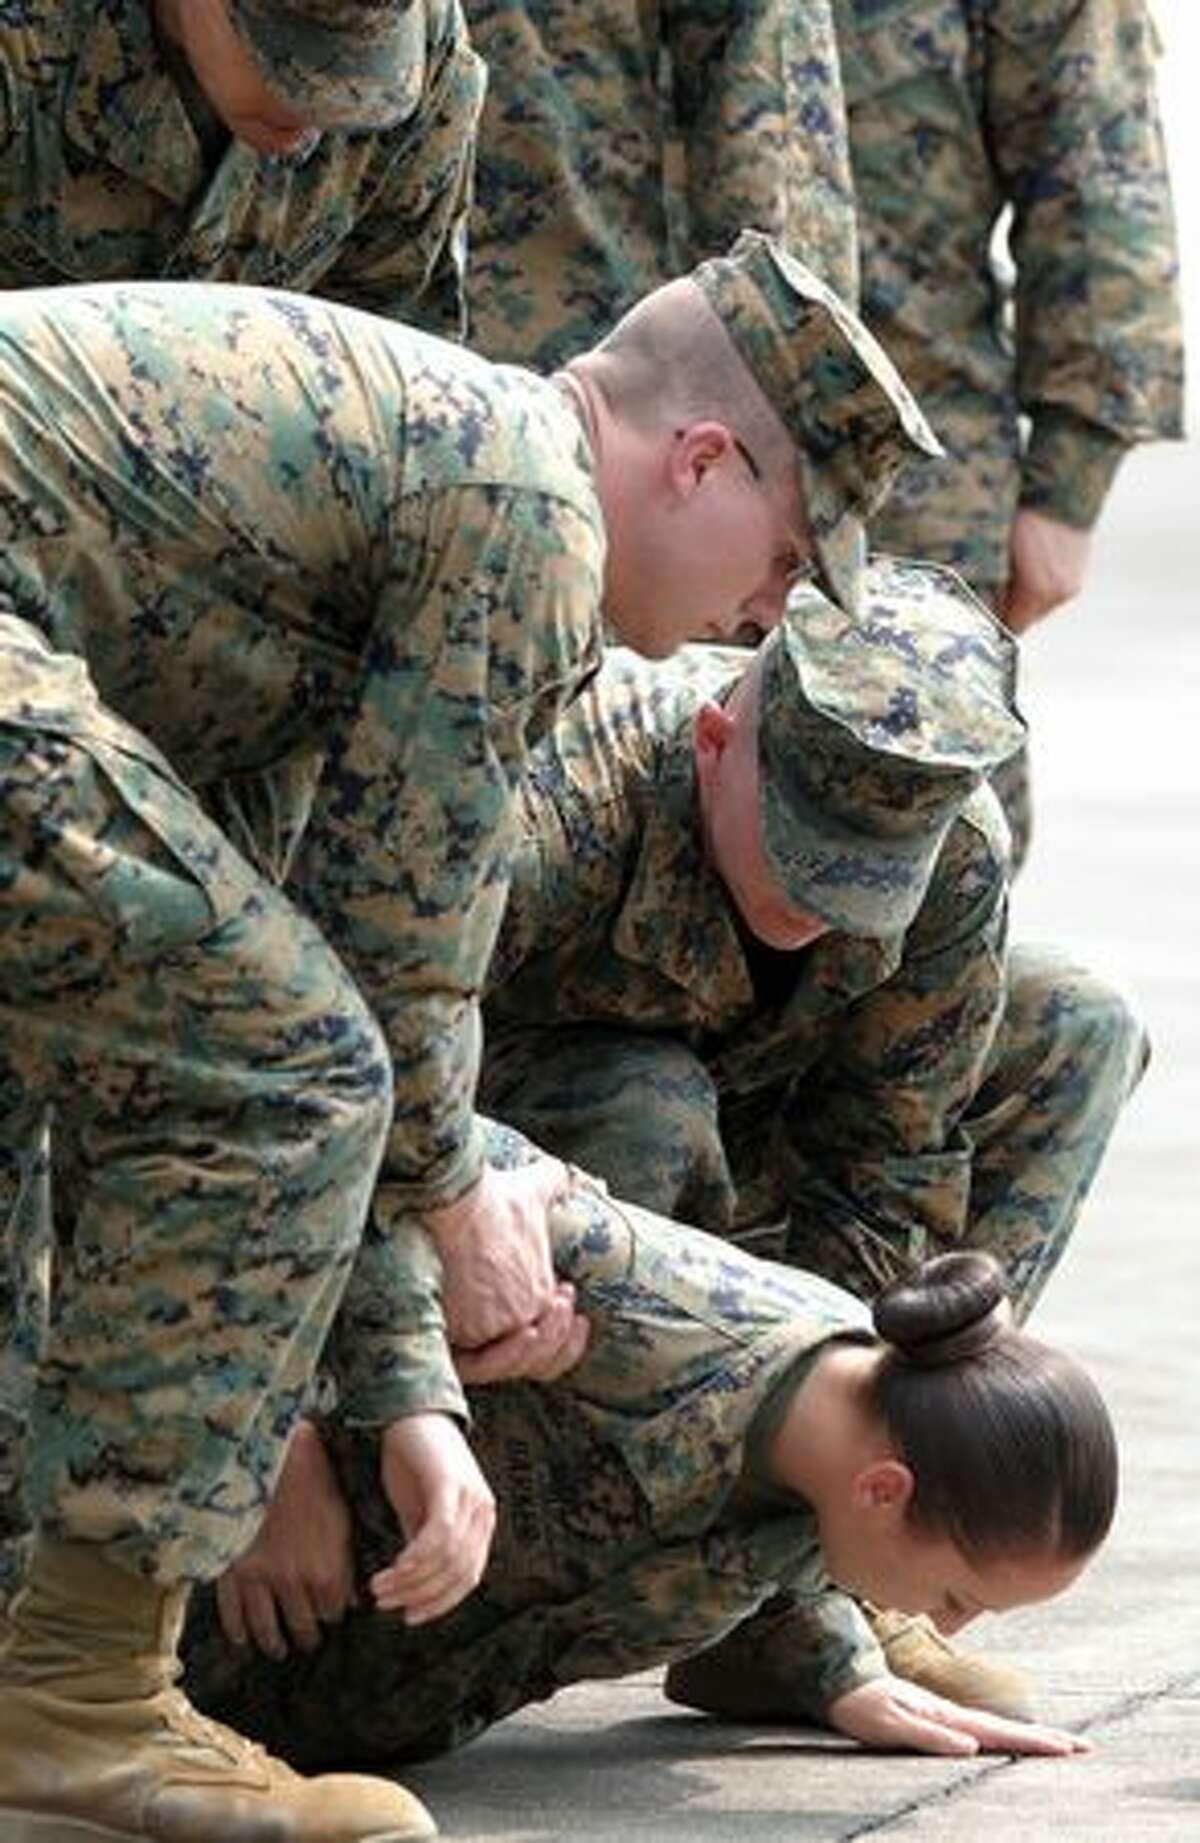 A member of the U.S. Marines is helped up by colleagues after fainting during the opening ceremony of the annual combined military exercise Cobra Gold 2010 at U-Tapao airport in Rayong province, Thailand, on Feb. 1, 2010.